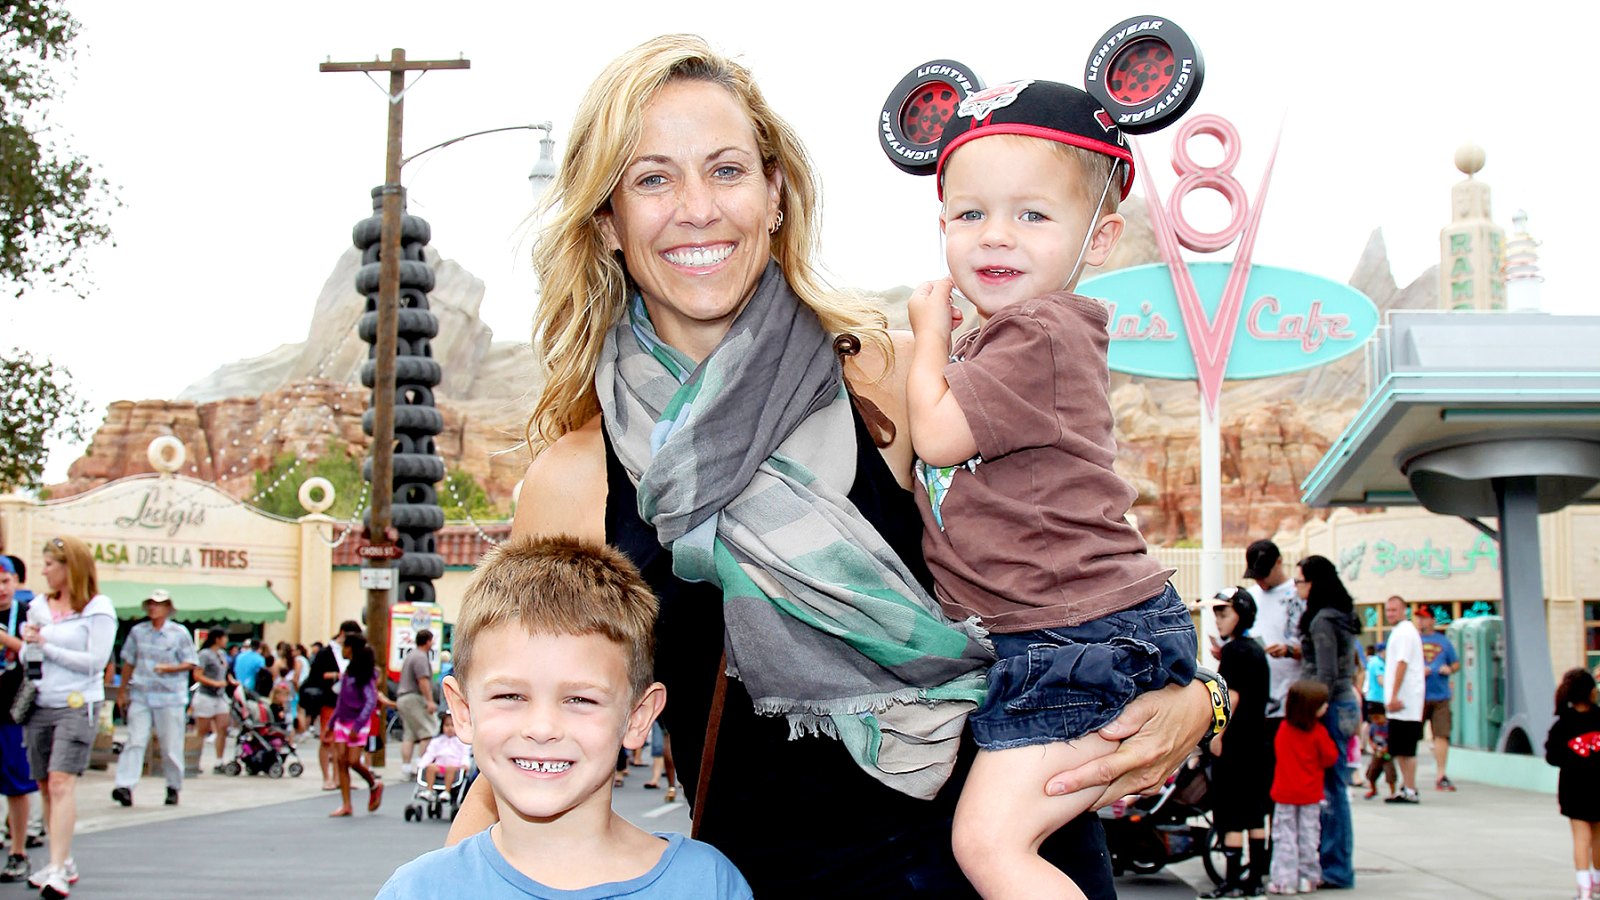 Sheryl Crow and her sons, Wyatt, 5 (left) and Levi, 2, pose at Cars Land in Disney California Adventure park on July 25, 2012 in Anaheim, California.